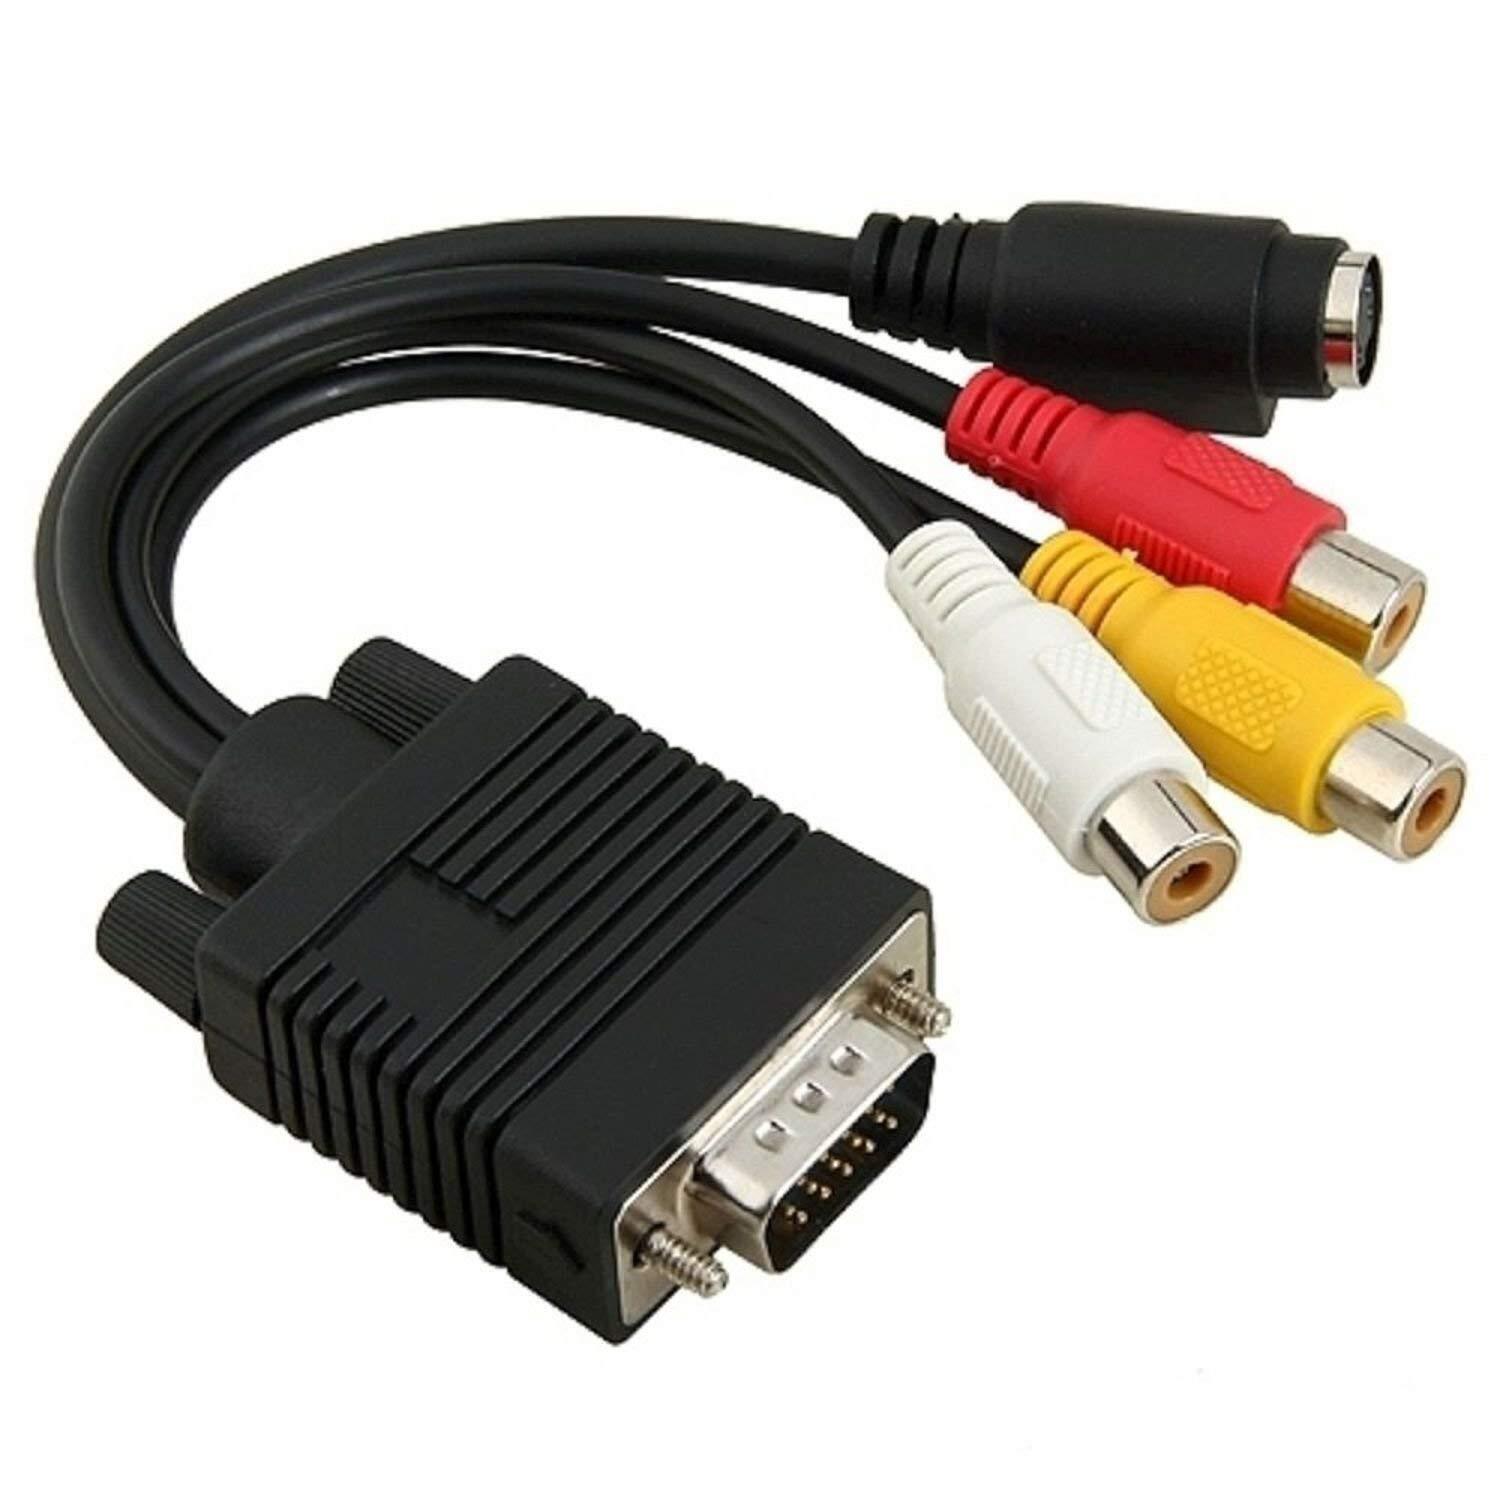 VGA to RCA Cable, VGA to TV S-Video 3 RCA PC Computer AV Adapter Cable